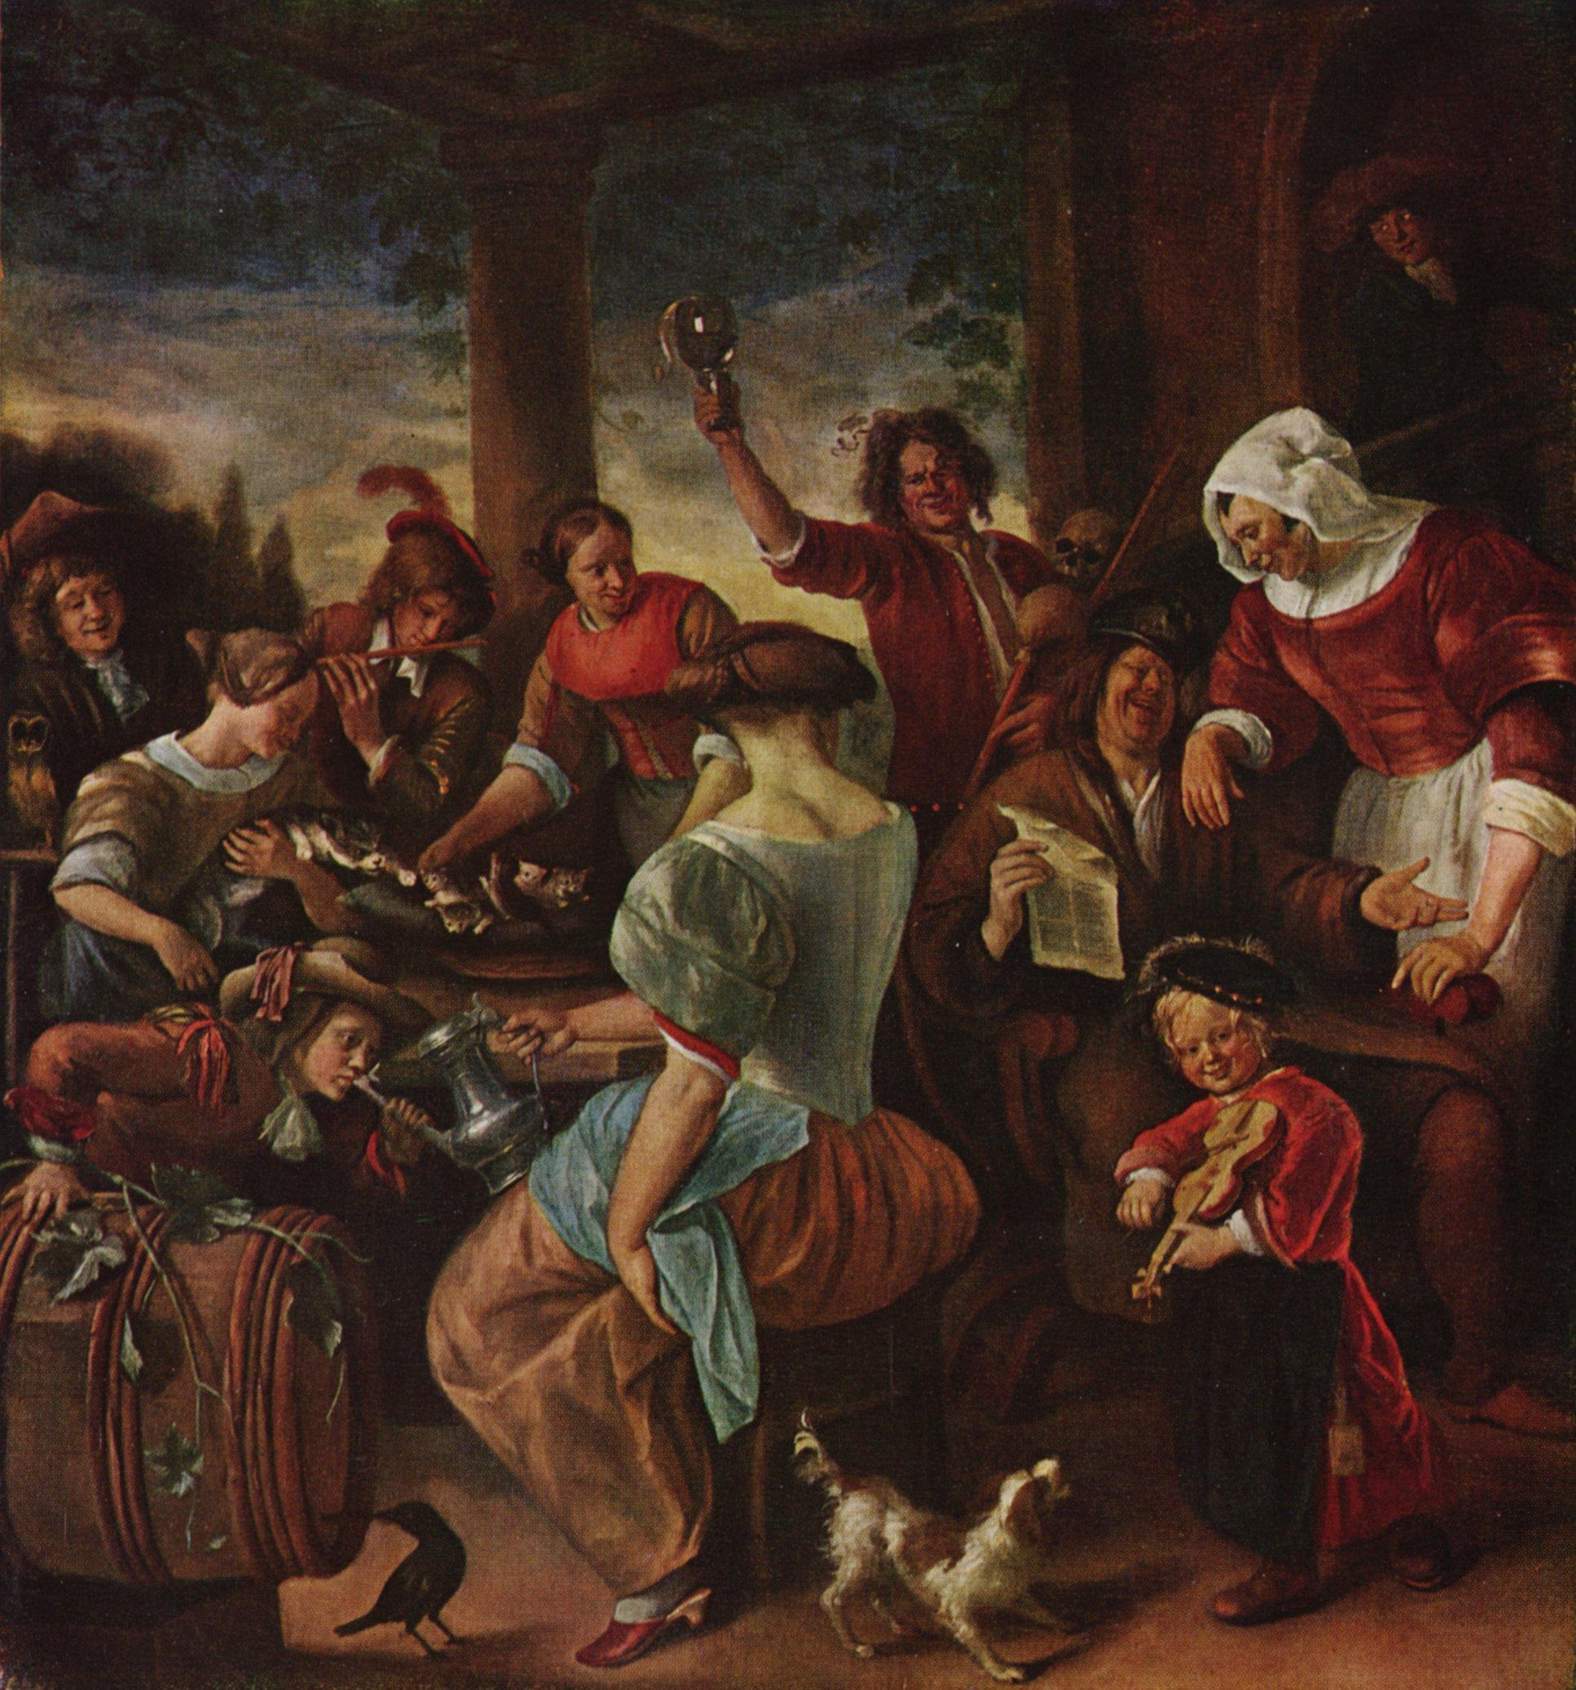 The Life of Man by Jan Steen